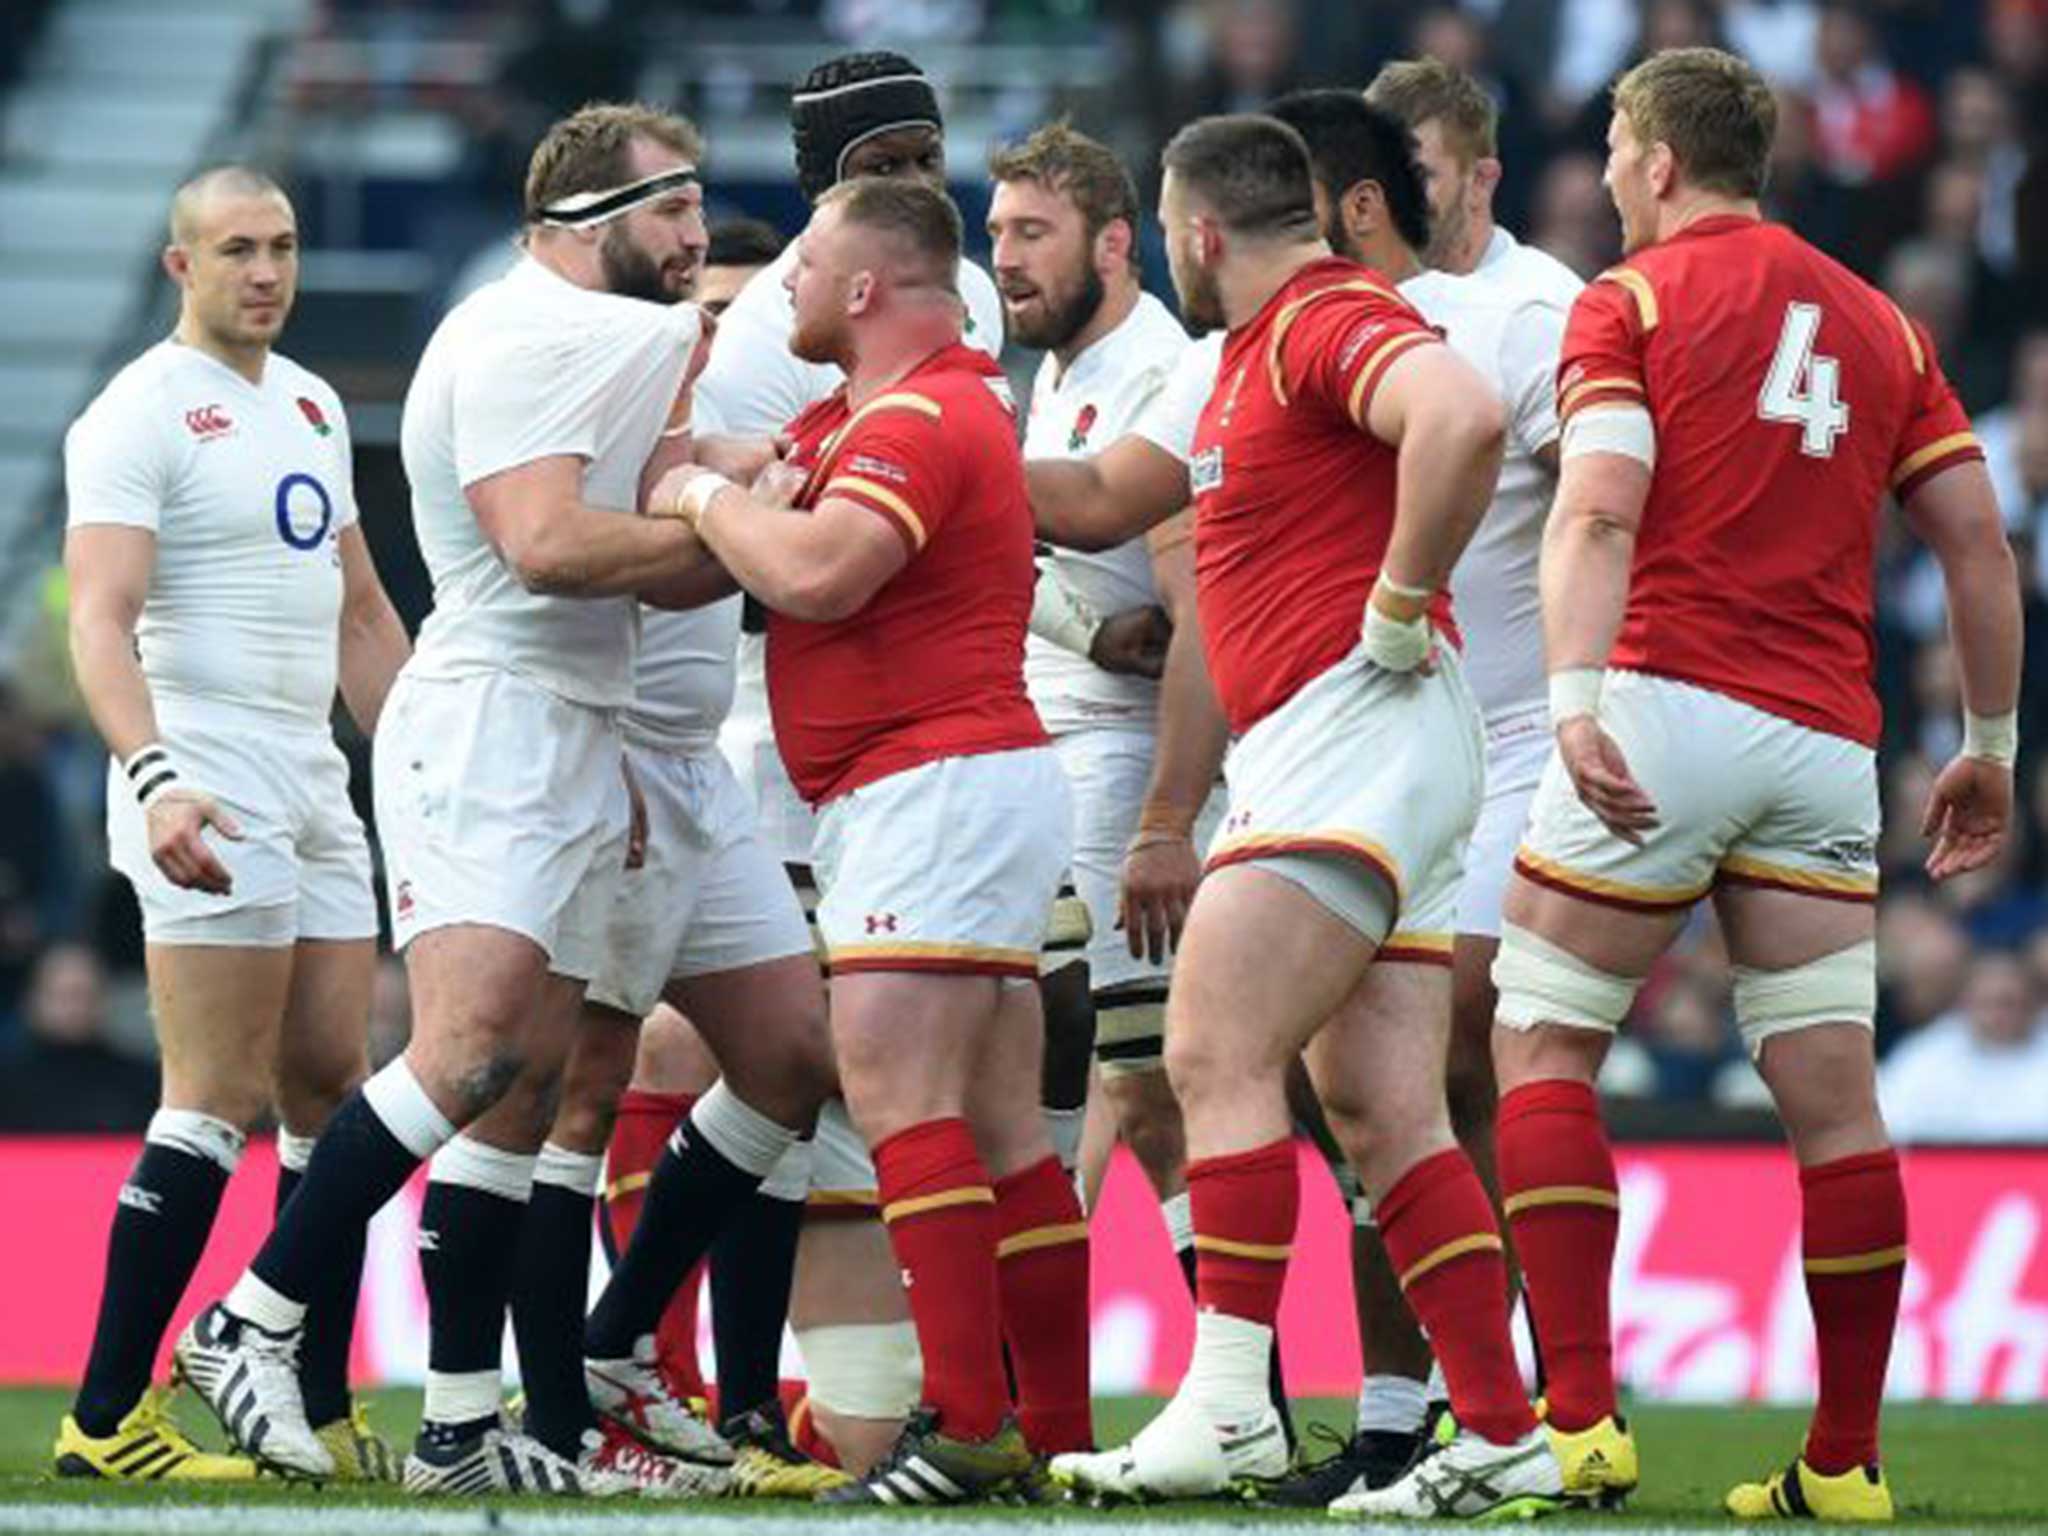 England's Joe Marler (2-L) scuffles with Wales' Samson Lee during the Six Nations rugby match at Twickenham